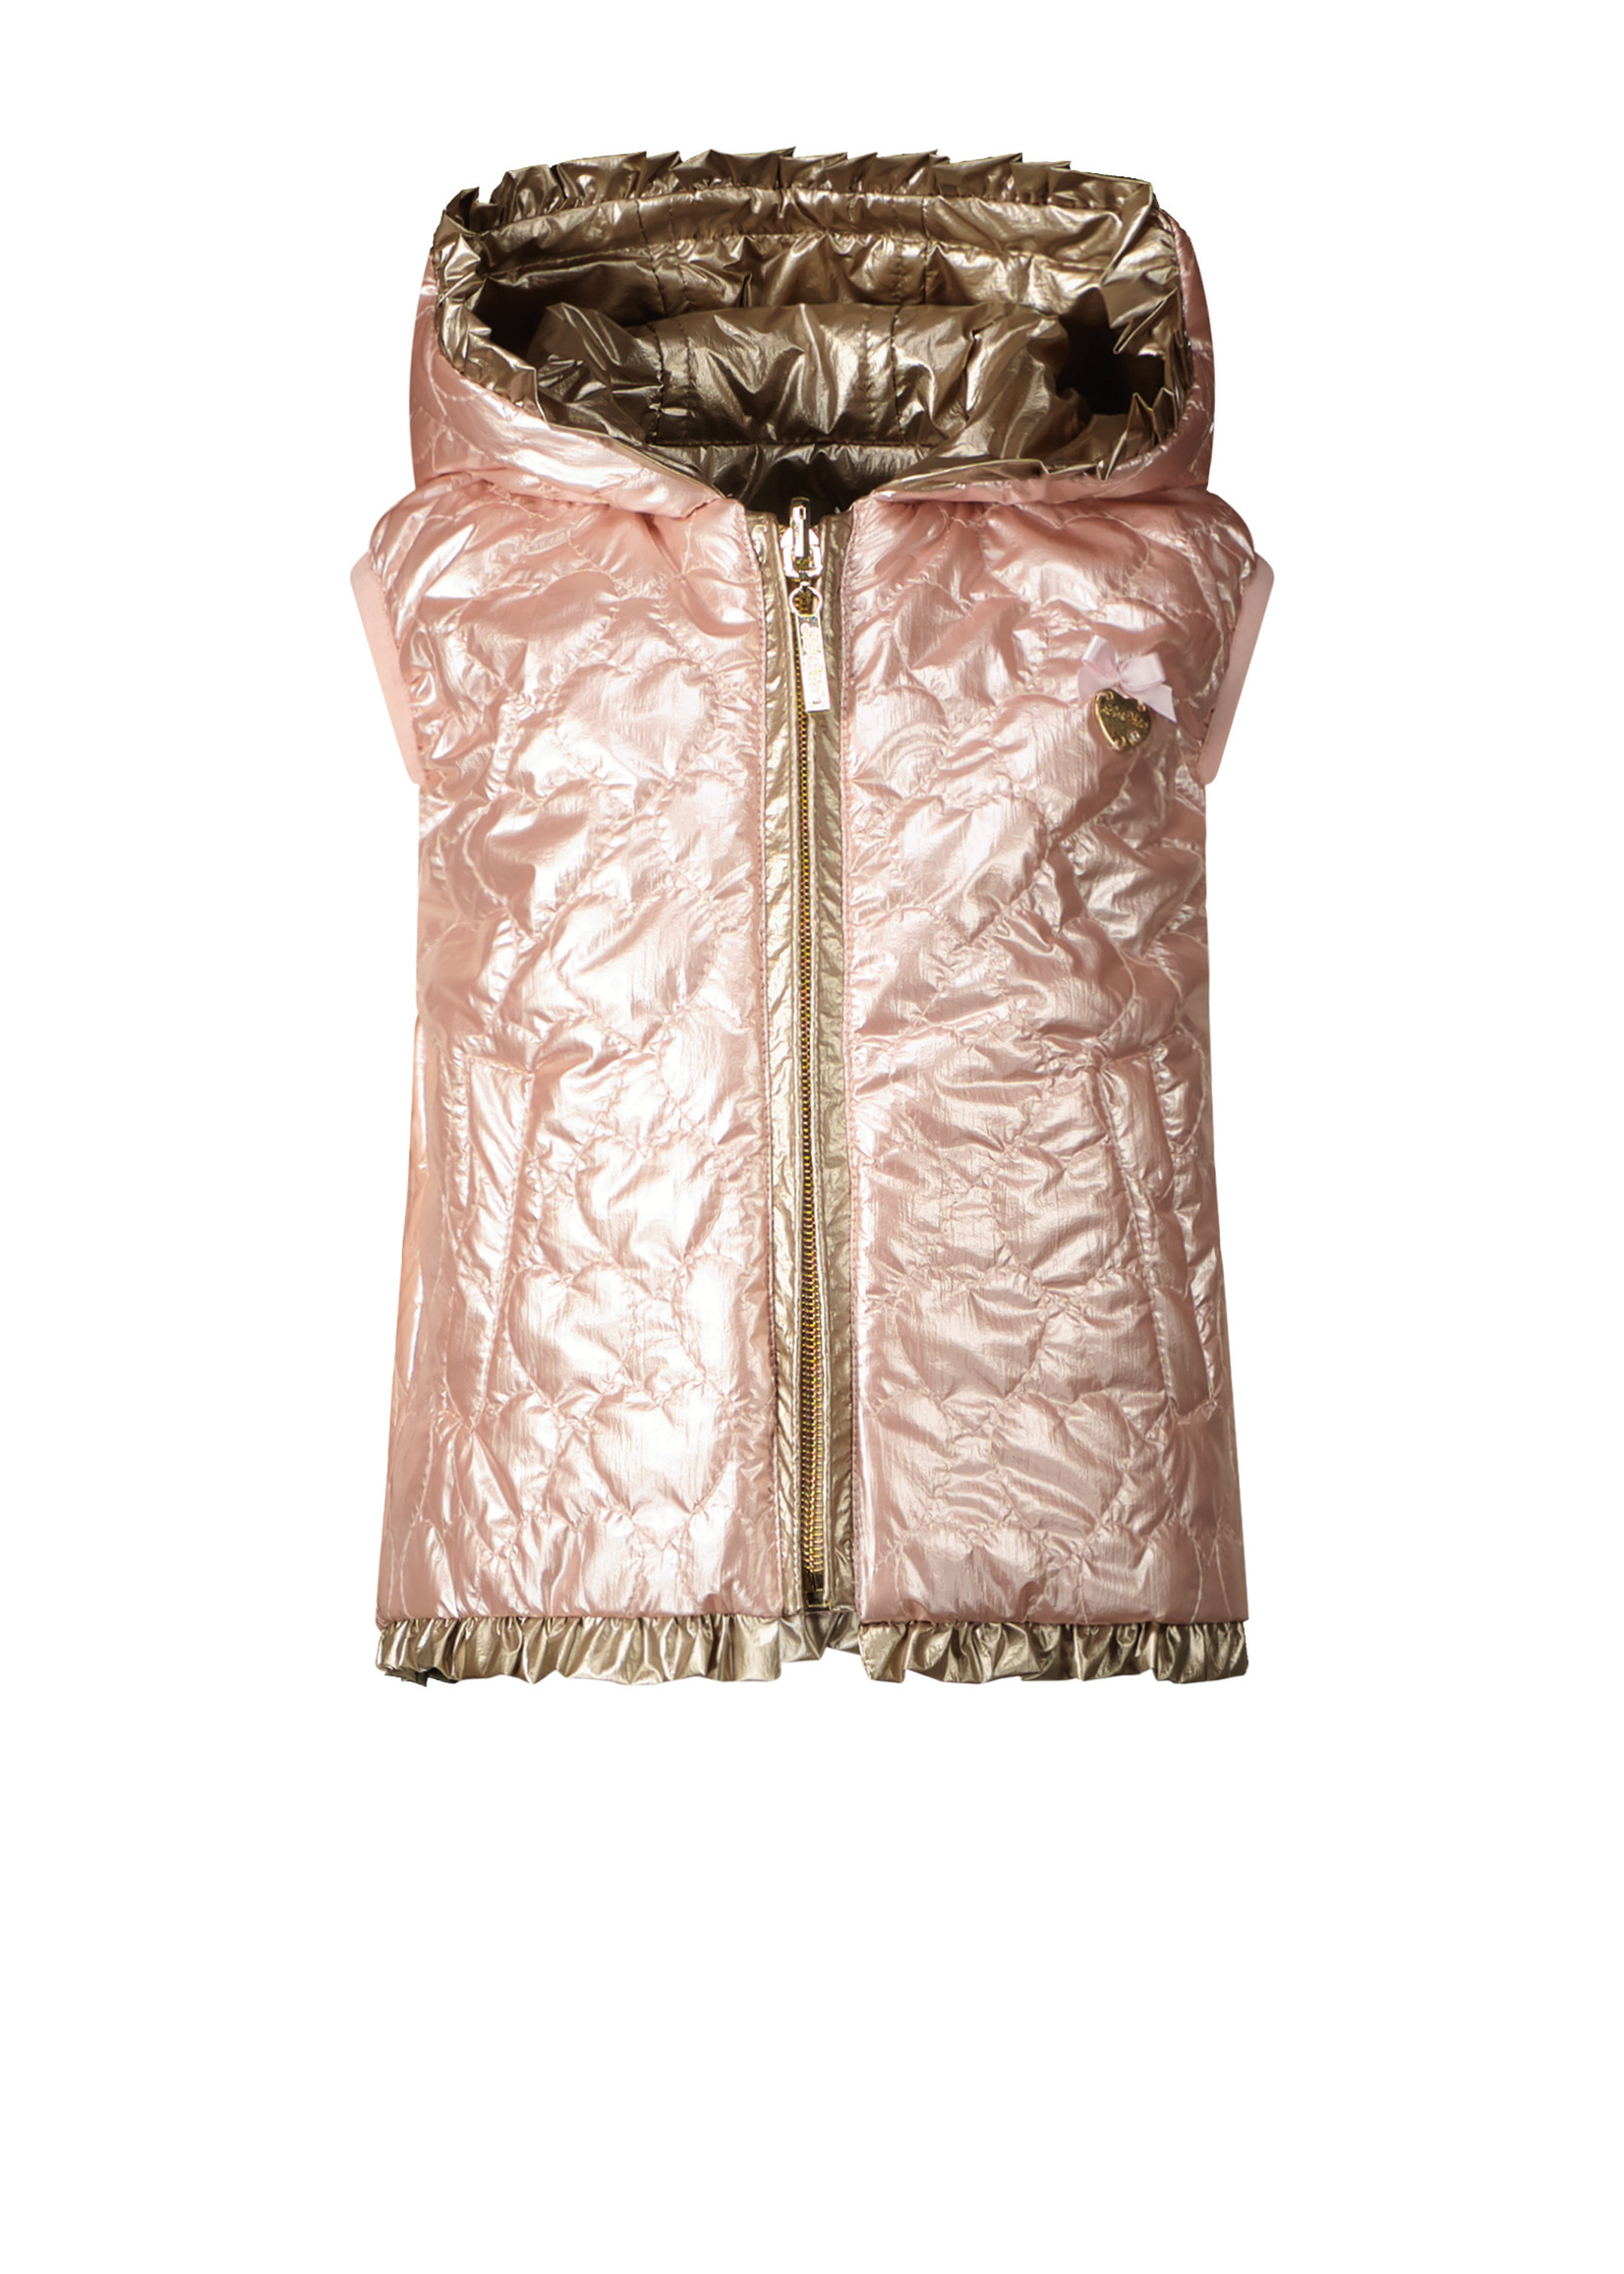 Le Chic BLITZY reversible bodywarmer Sweets for my Sweet